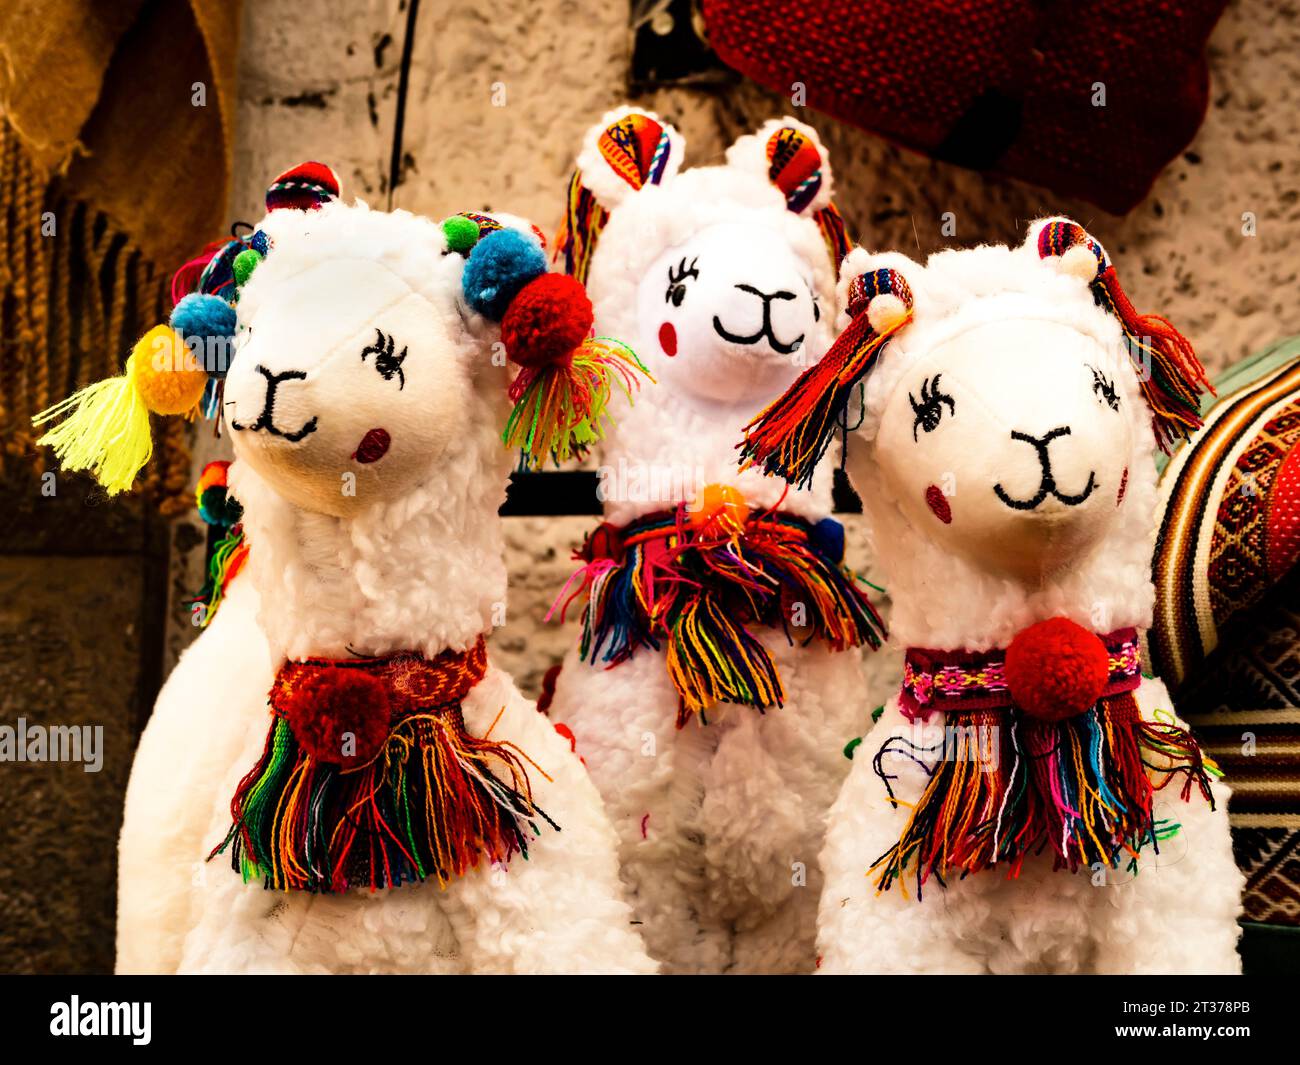 Smiling alpaca plush toys ornated with rainbow-colored bows, Pisac traditional market, Peru Stock Photo